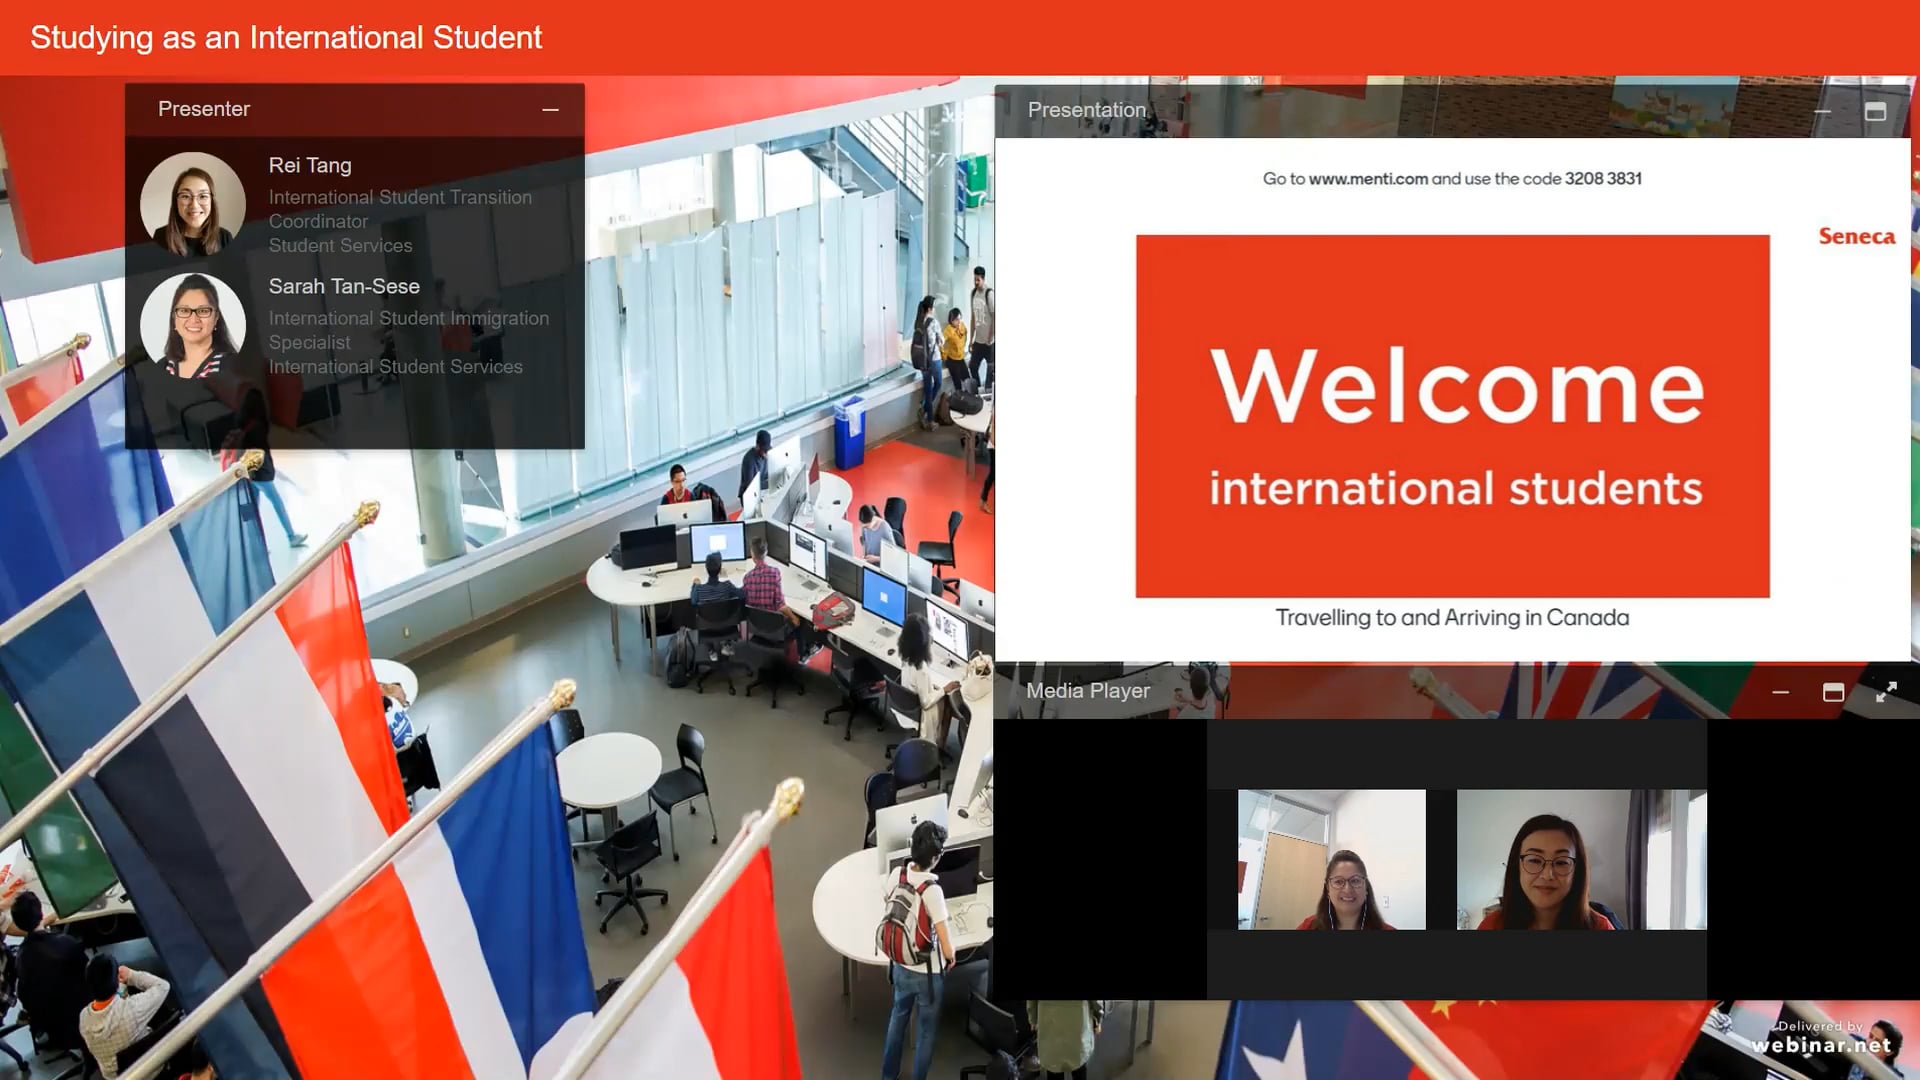 Studying as an International Student